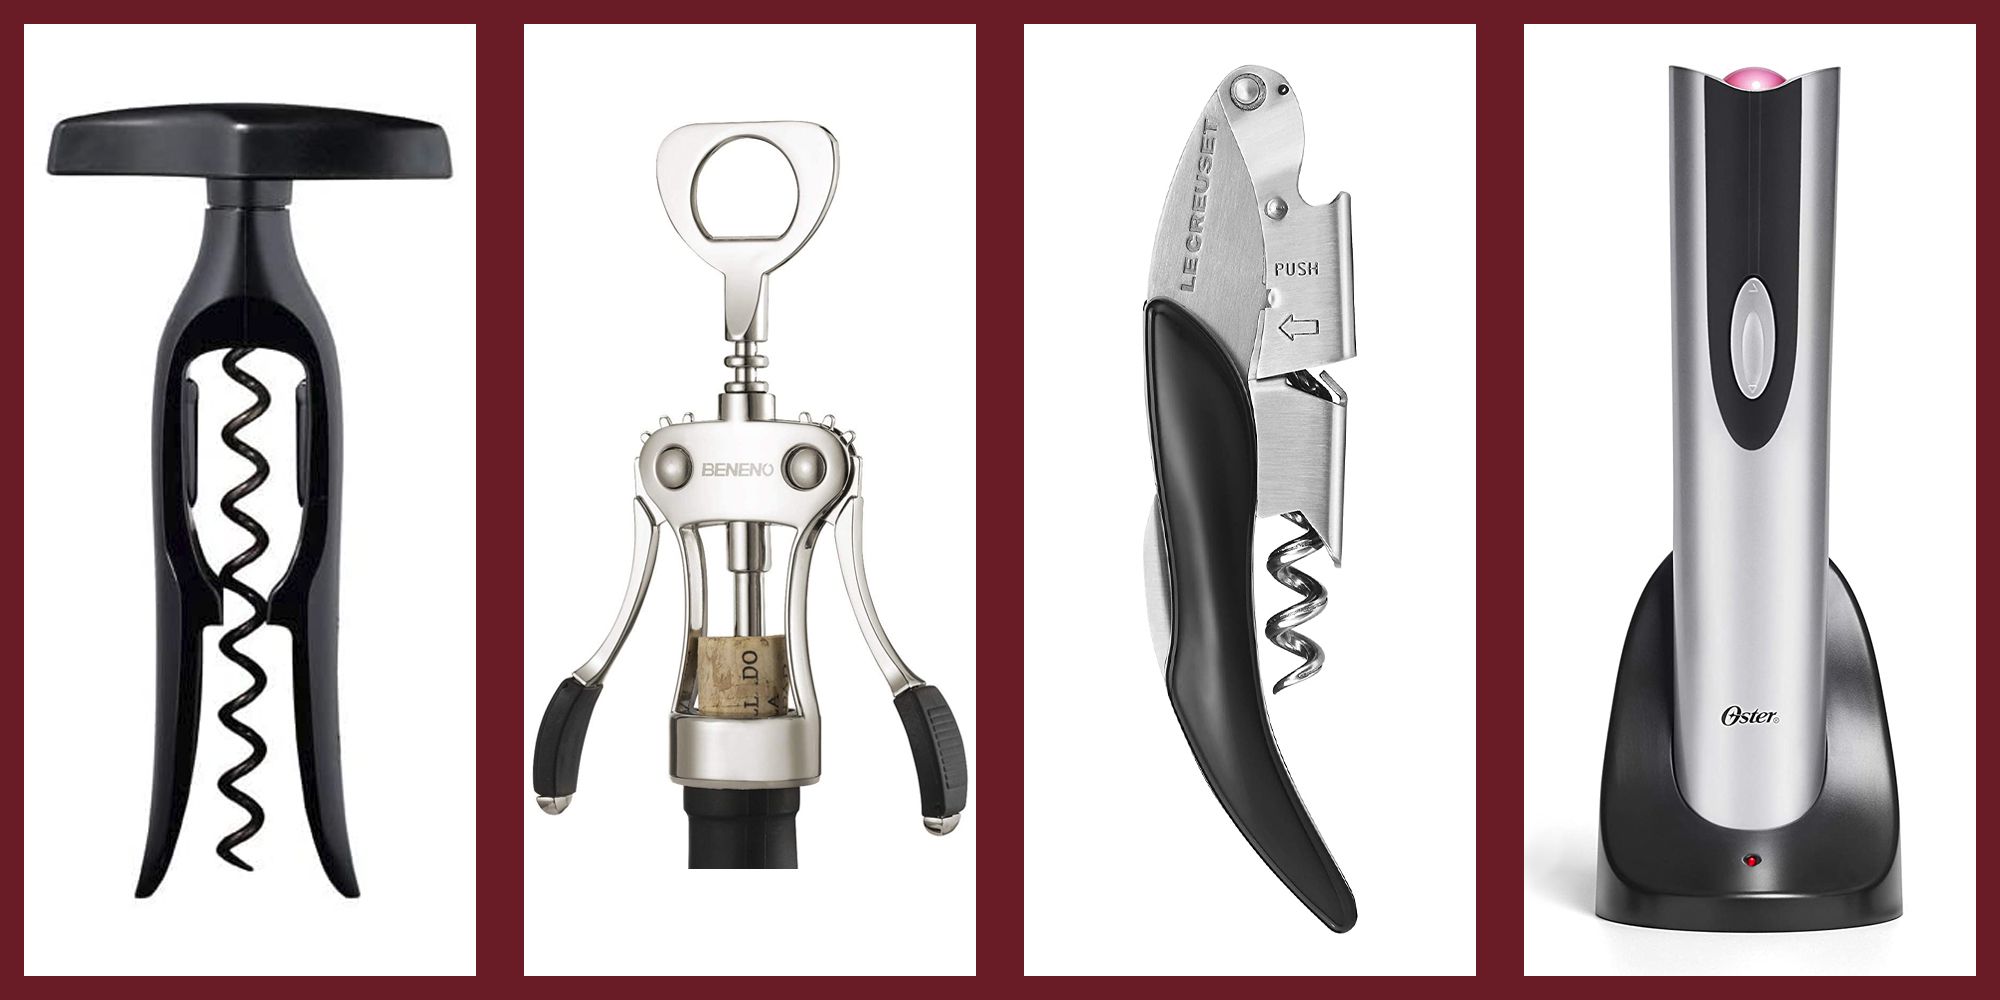 The Best Corkscrew for Opening Wine